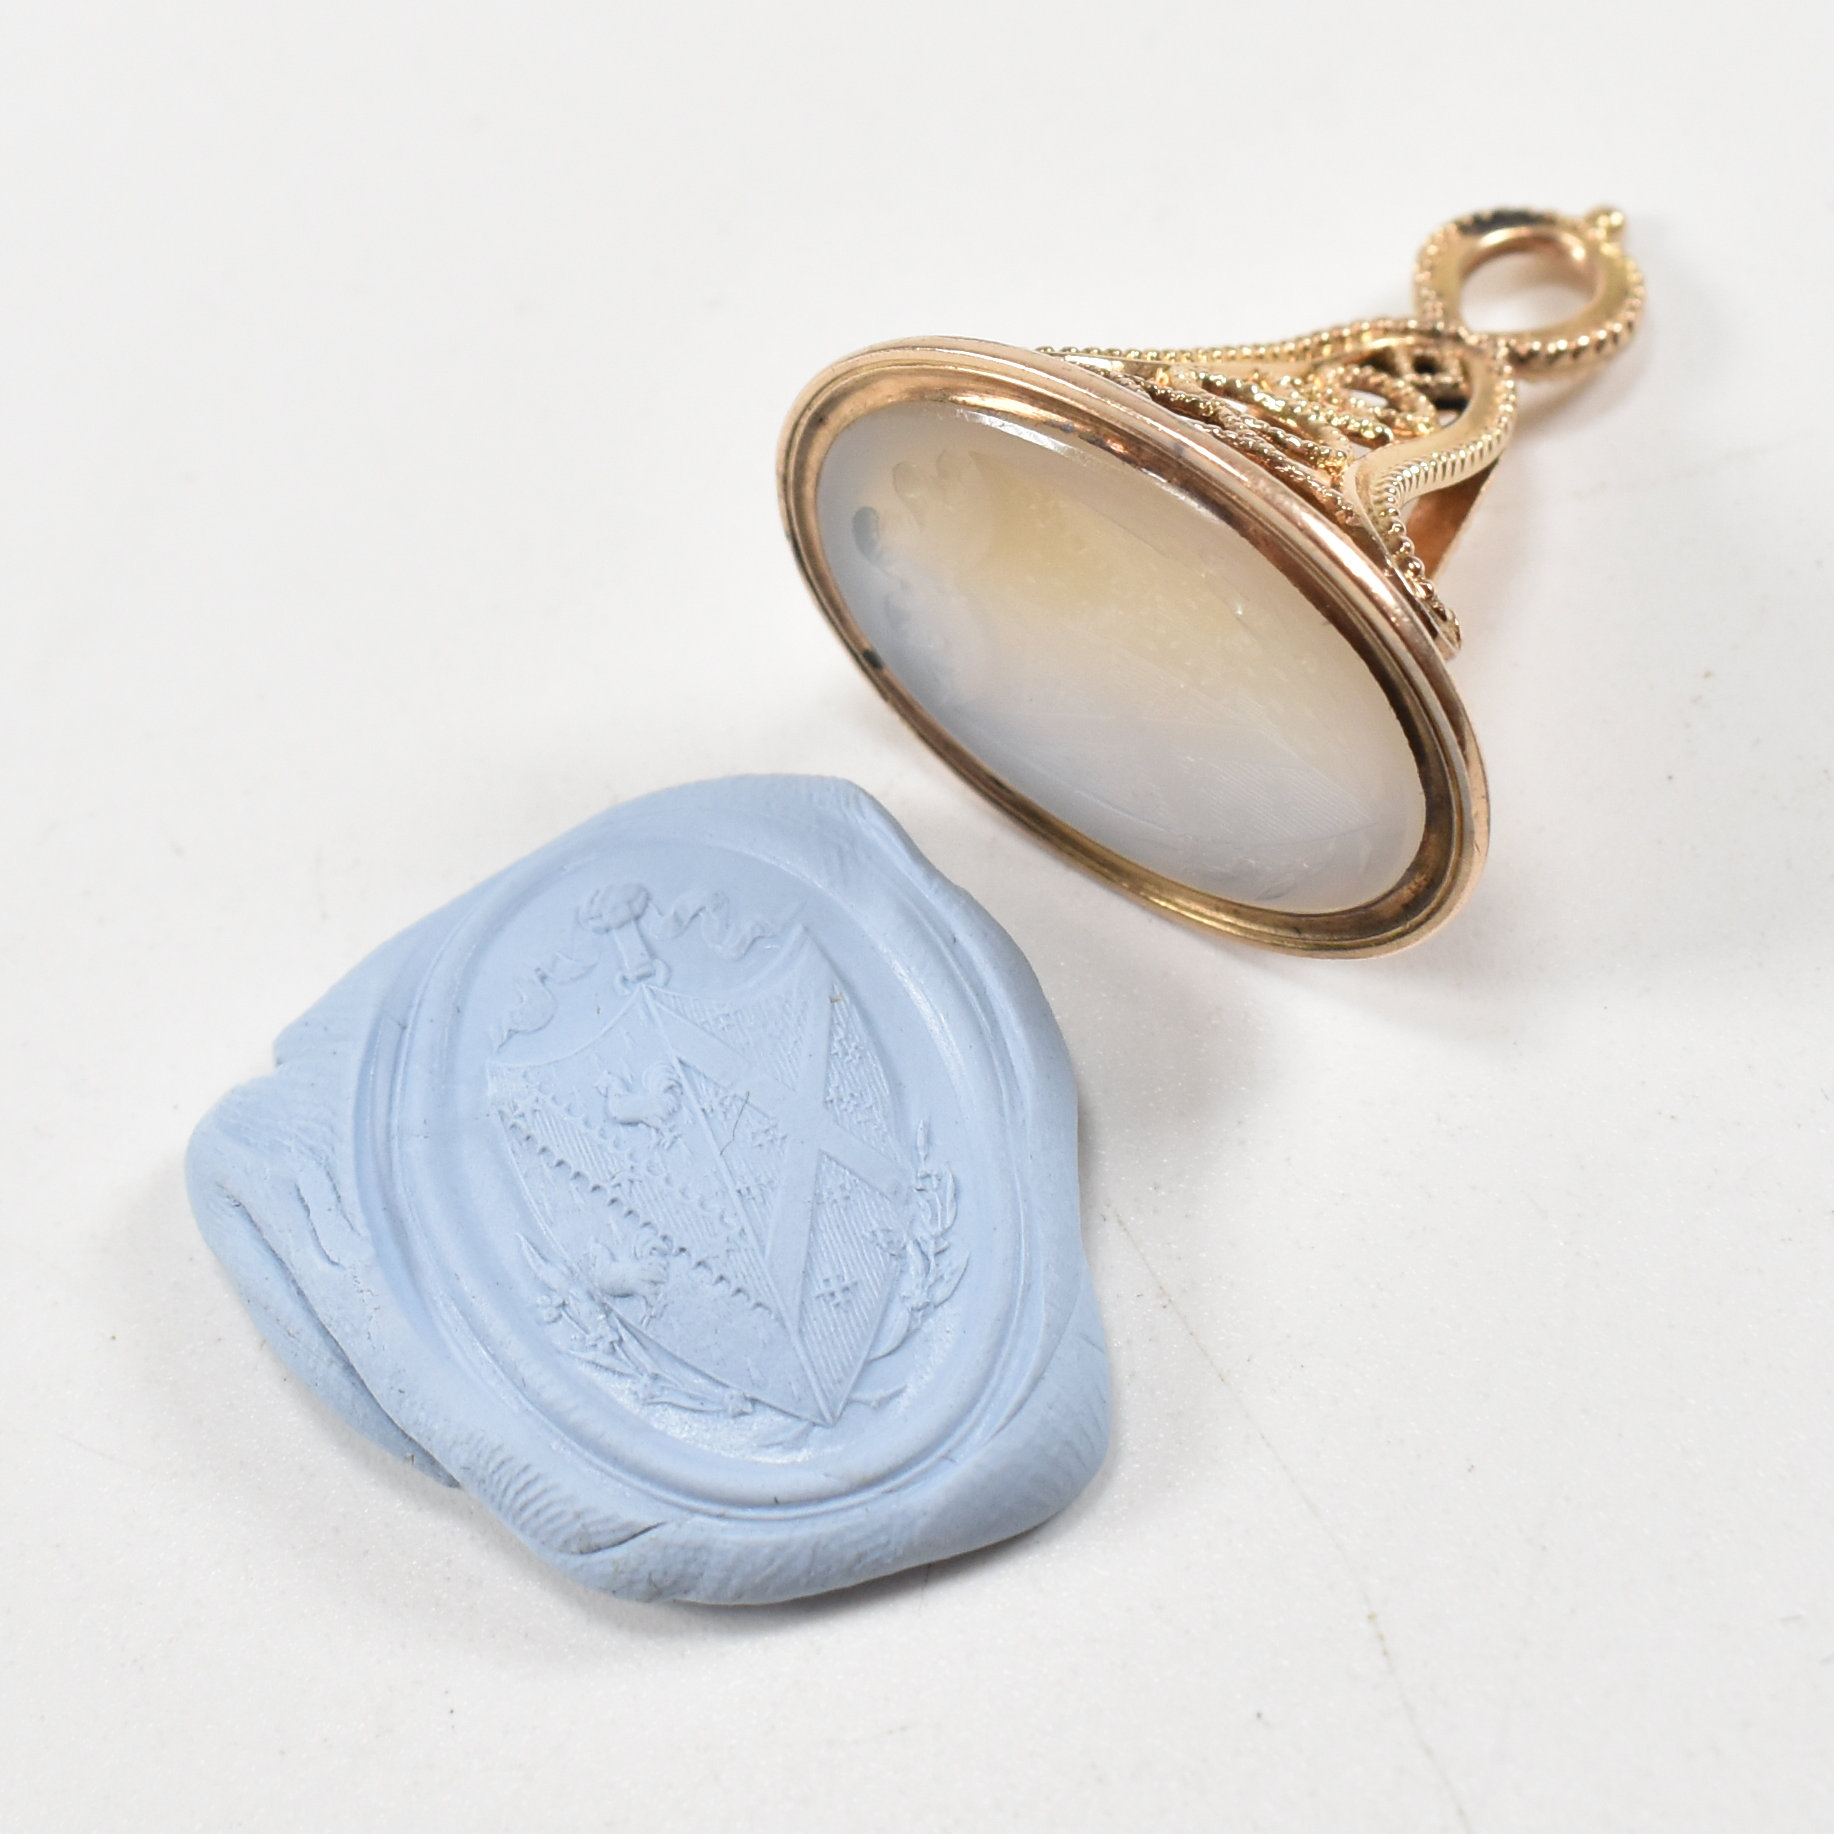 GEORGIAN GOLD CARVED INTAGLIO AGATE SEAL FOB - Image 9 of 9